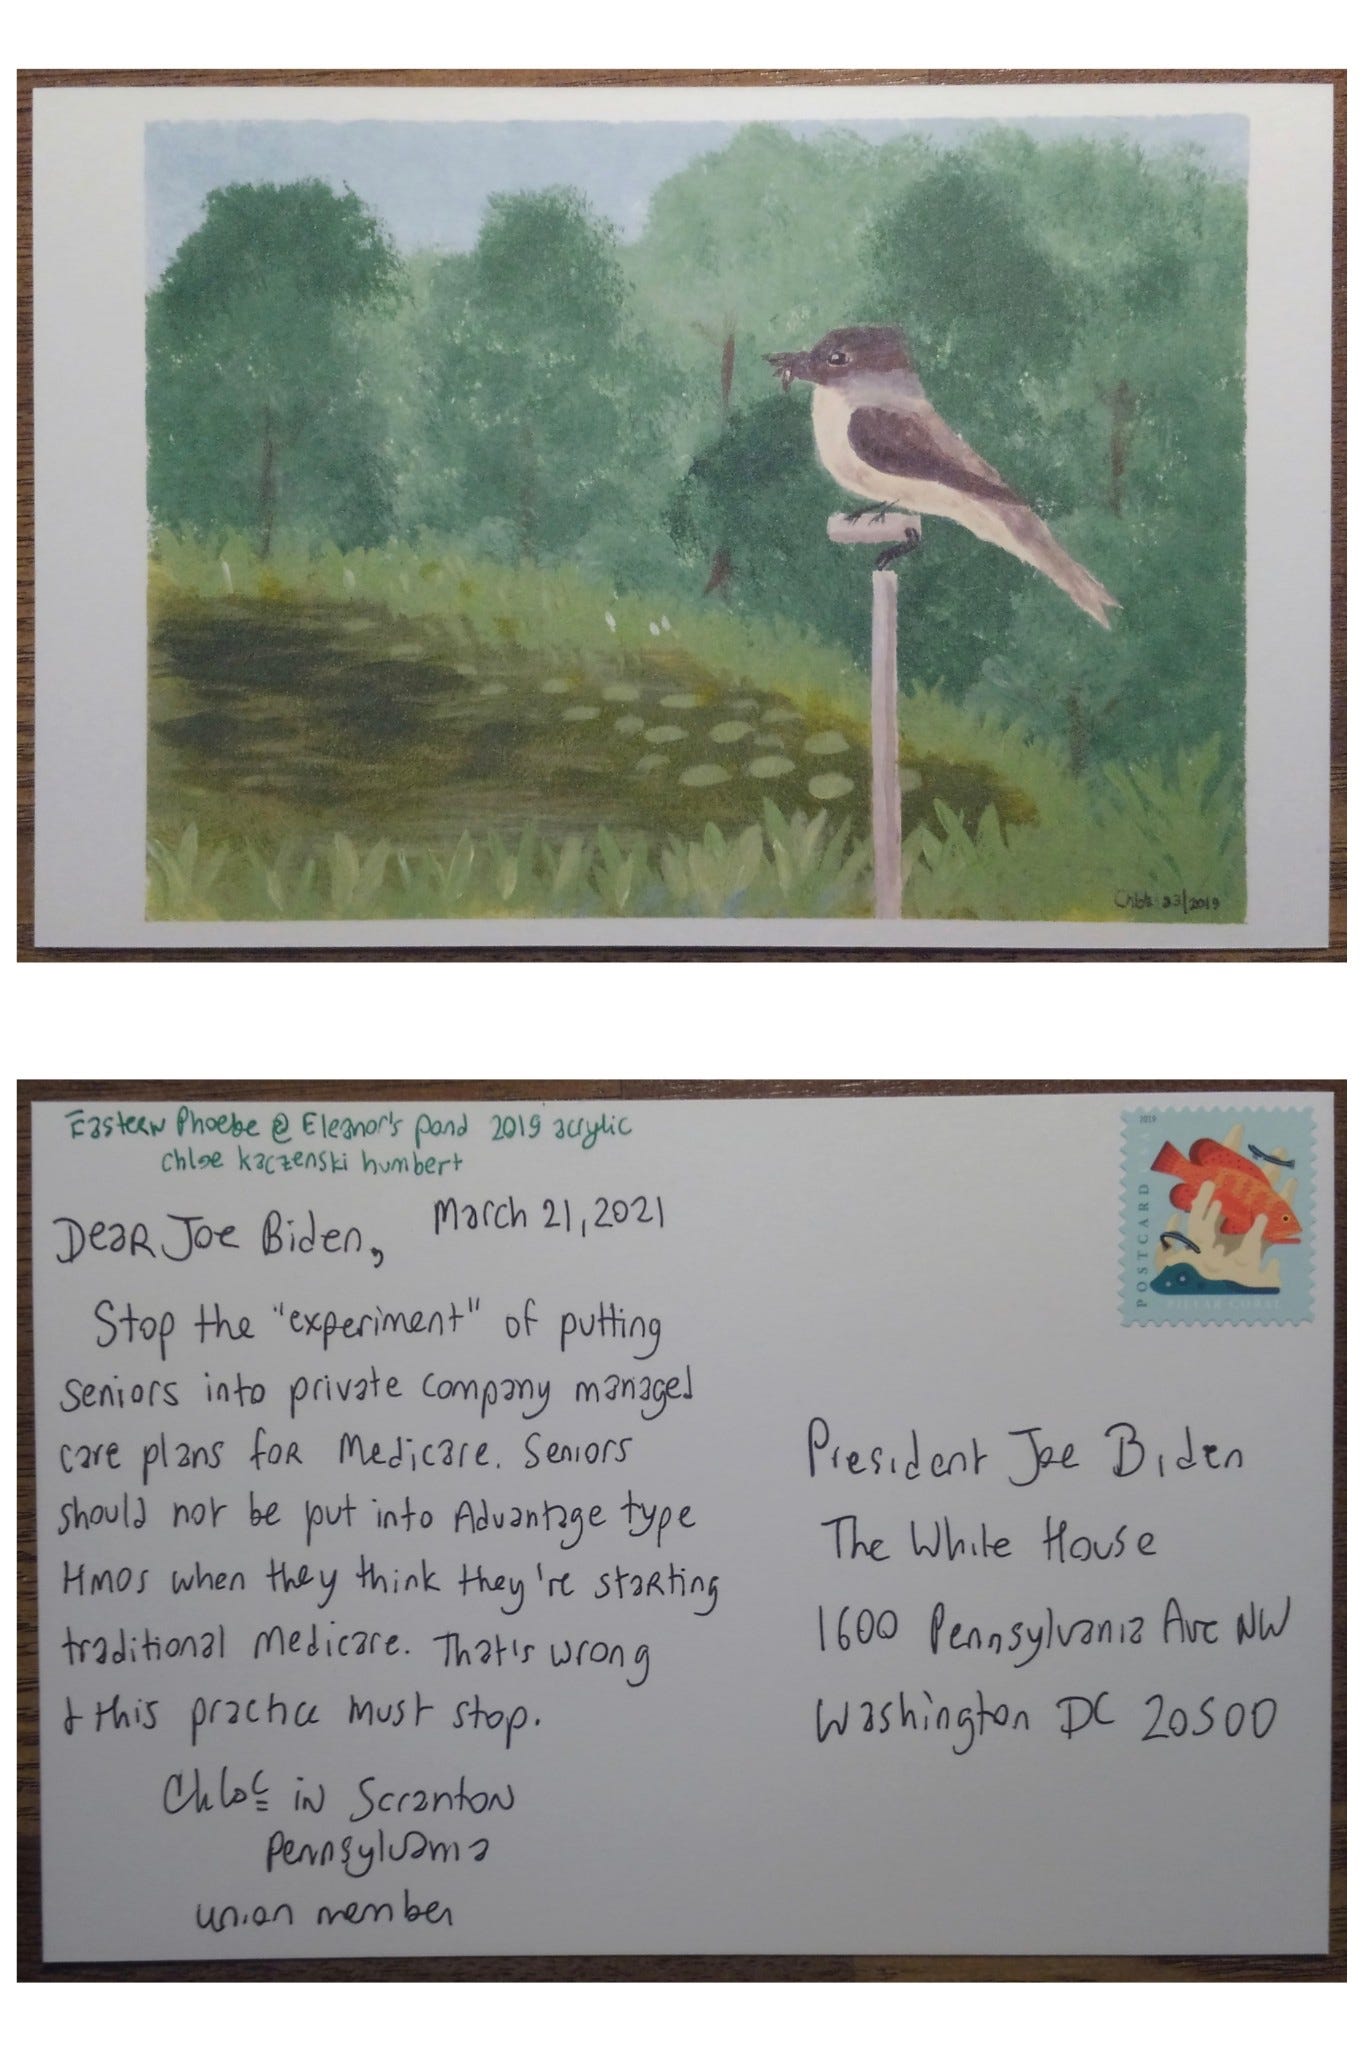 The image is of a postcard, front and back, the front is a painting of an eastern phoebe bird on a pole perch next to a pond surrounded by trees. The postcard has a fish postcard stamp and is addressed to President Joe Biden at the White House address, is dated March 21, 2021, and reads Dear Joe Biden, Stop the “experiment” of putting seniors into private company managed care plans for Medicare. Seniors should not be put into Advantage type HMOs when they think they’re starting traditional Medicare. That’s wrong & this practice must stop. Chloe in Scranton Pennsylvania union member. 